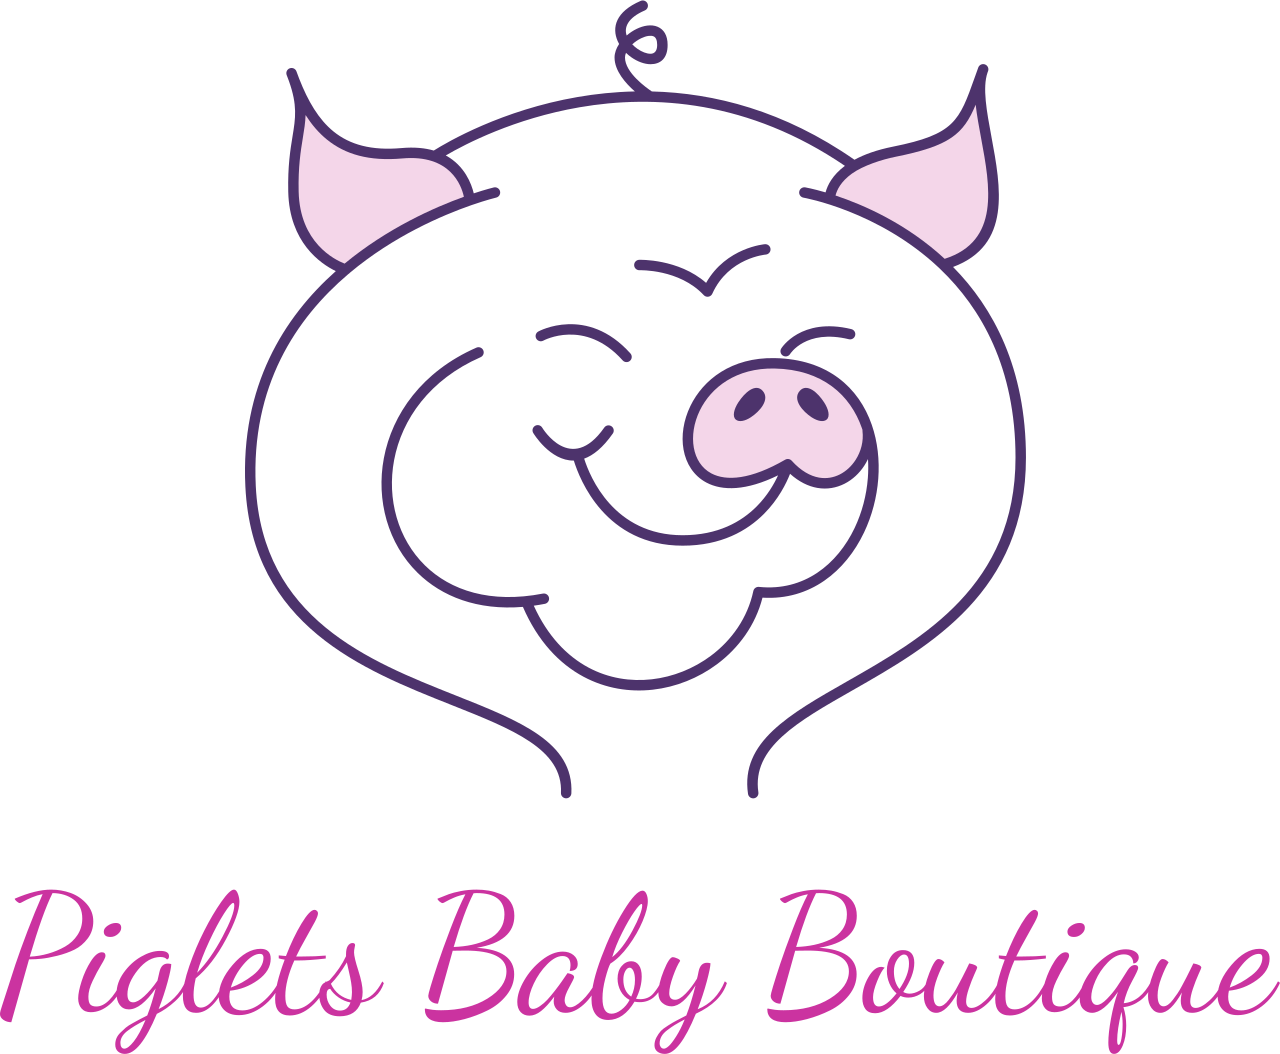 Piglets Baby Boutique's logo